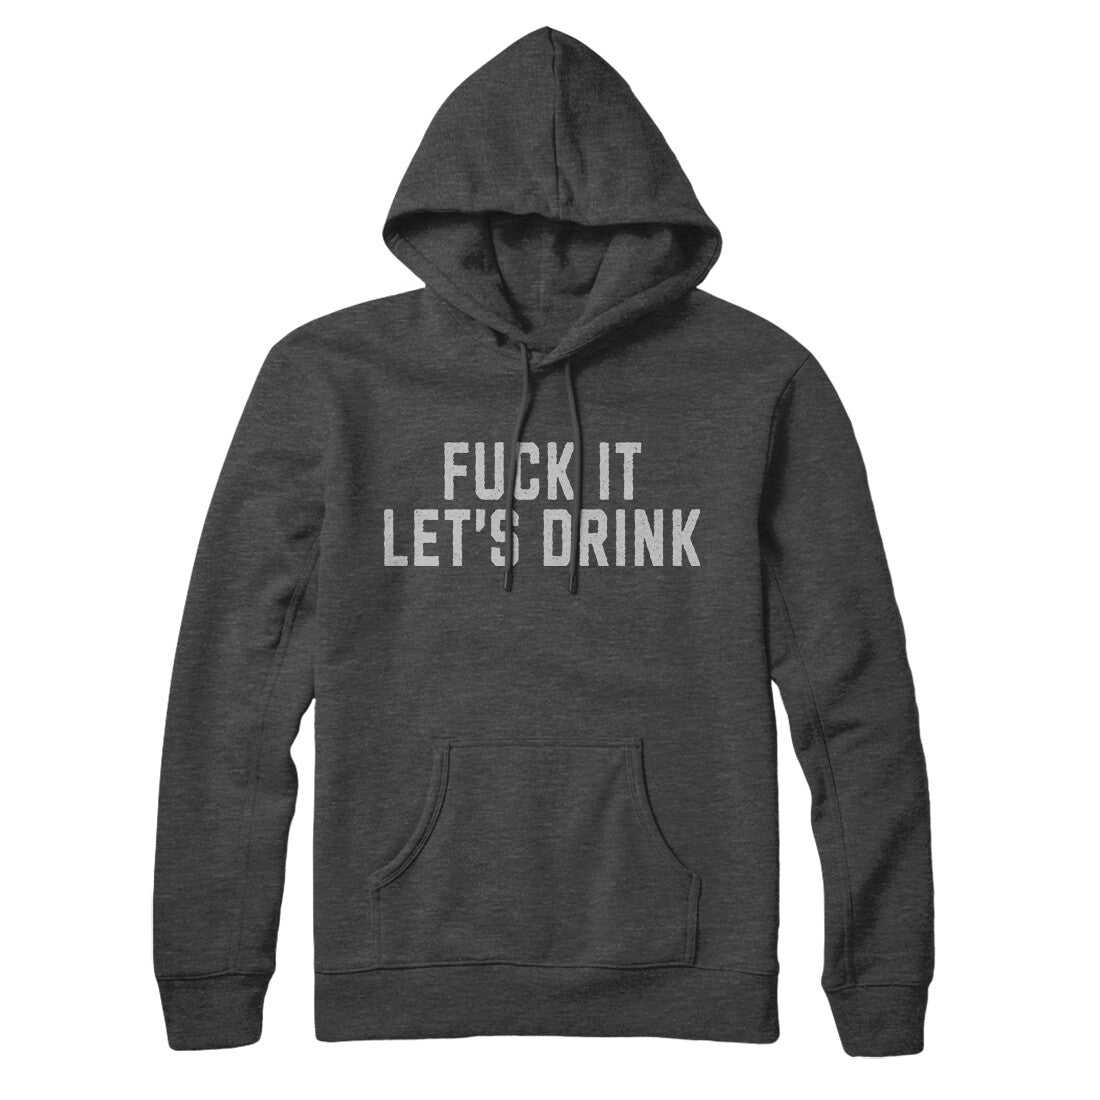 Fuck It Lets Drink in Charcoal Heather Color